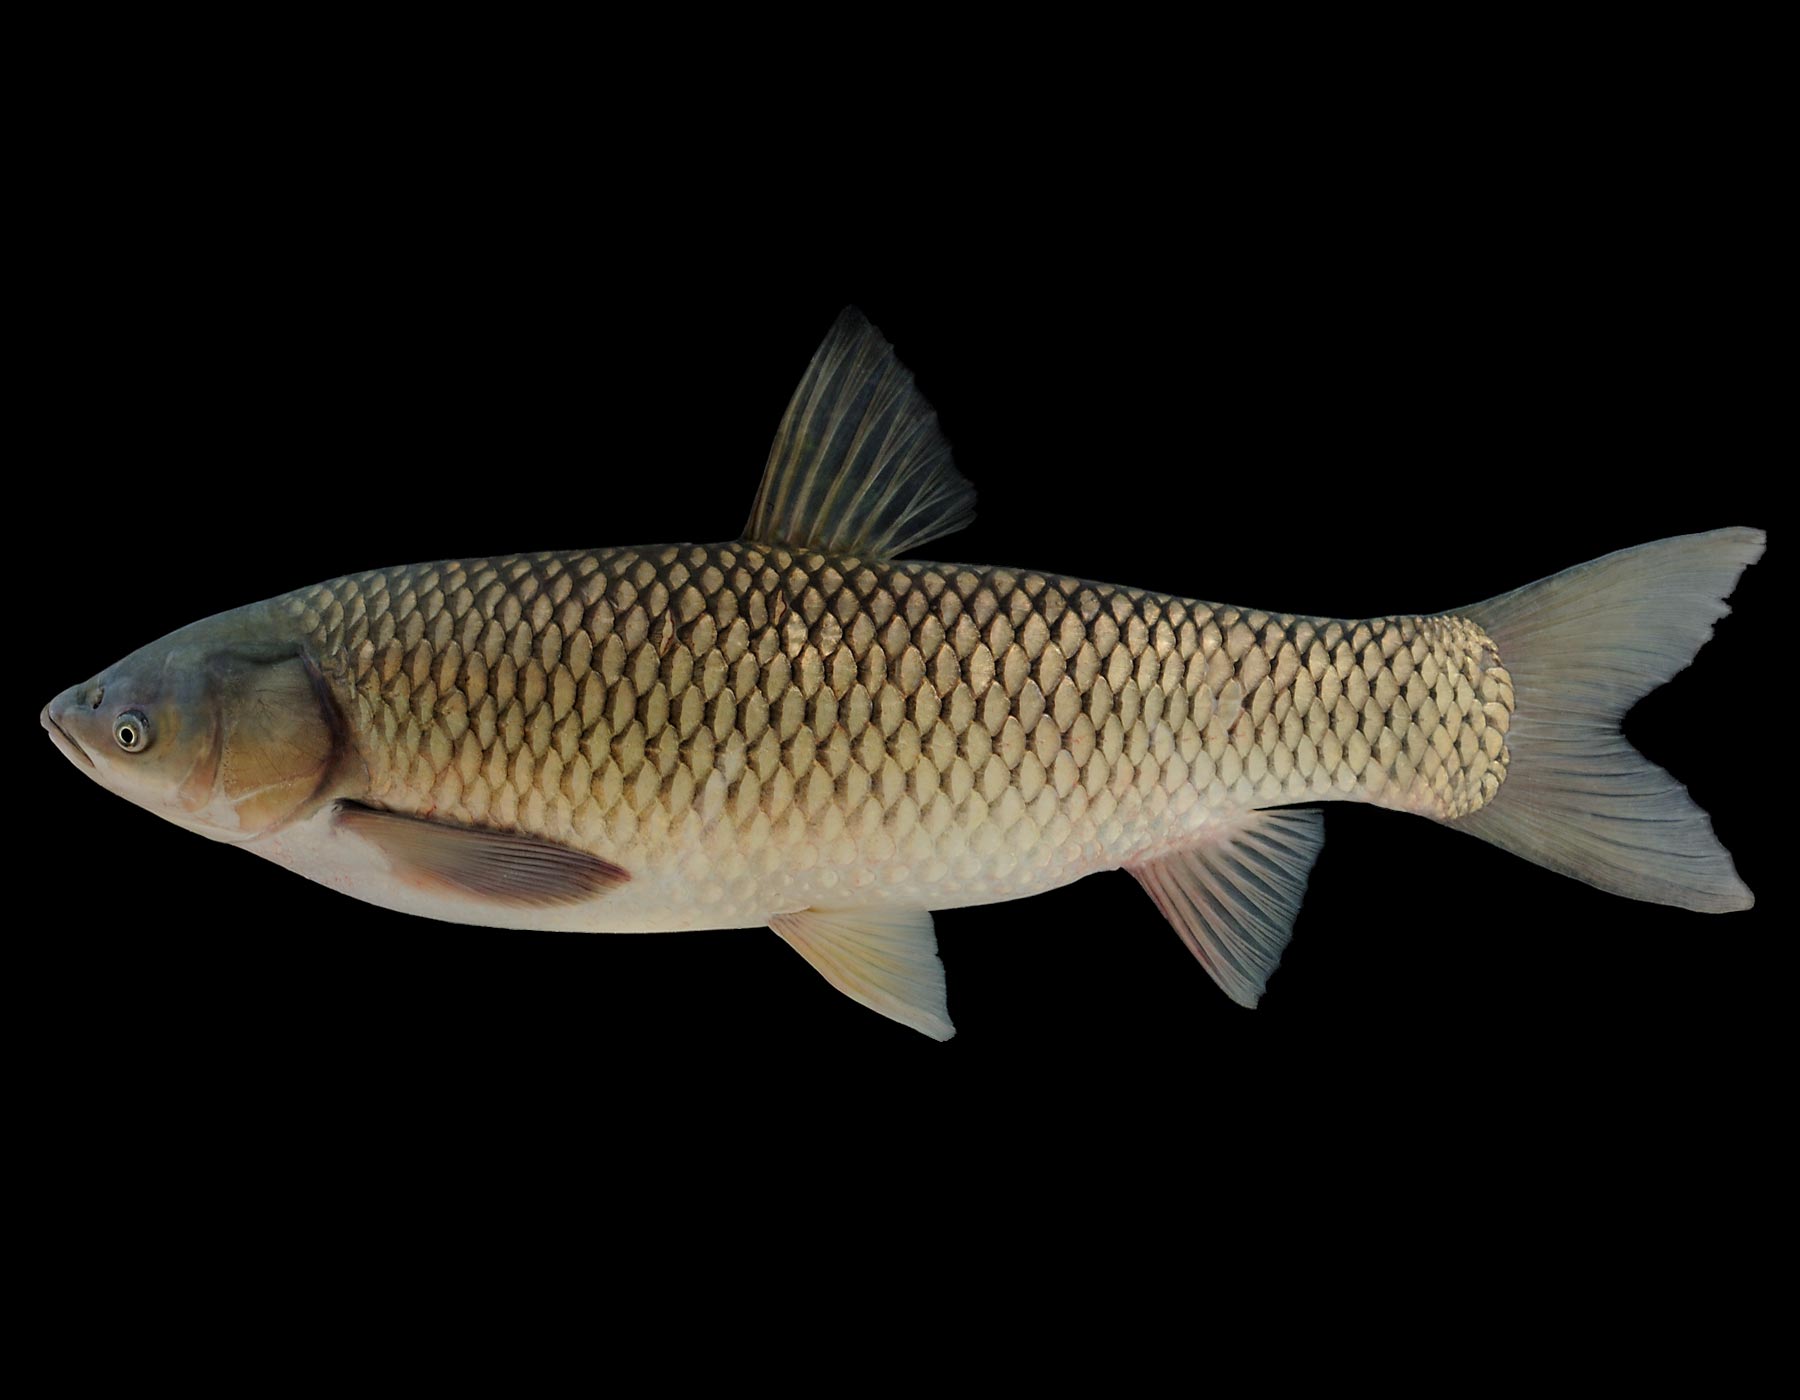 Grass carp side view photo with black background